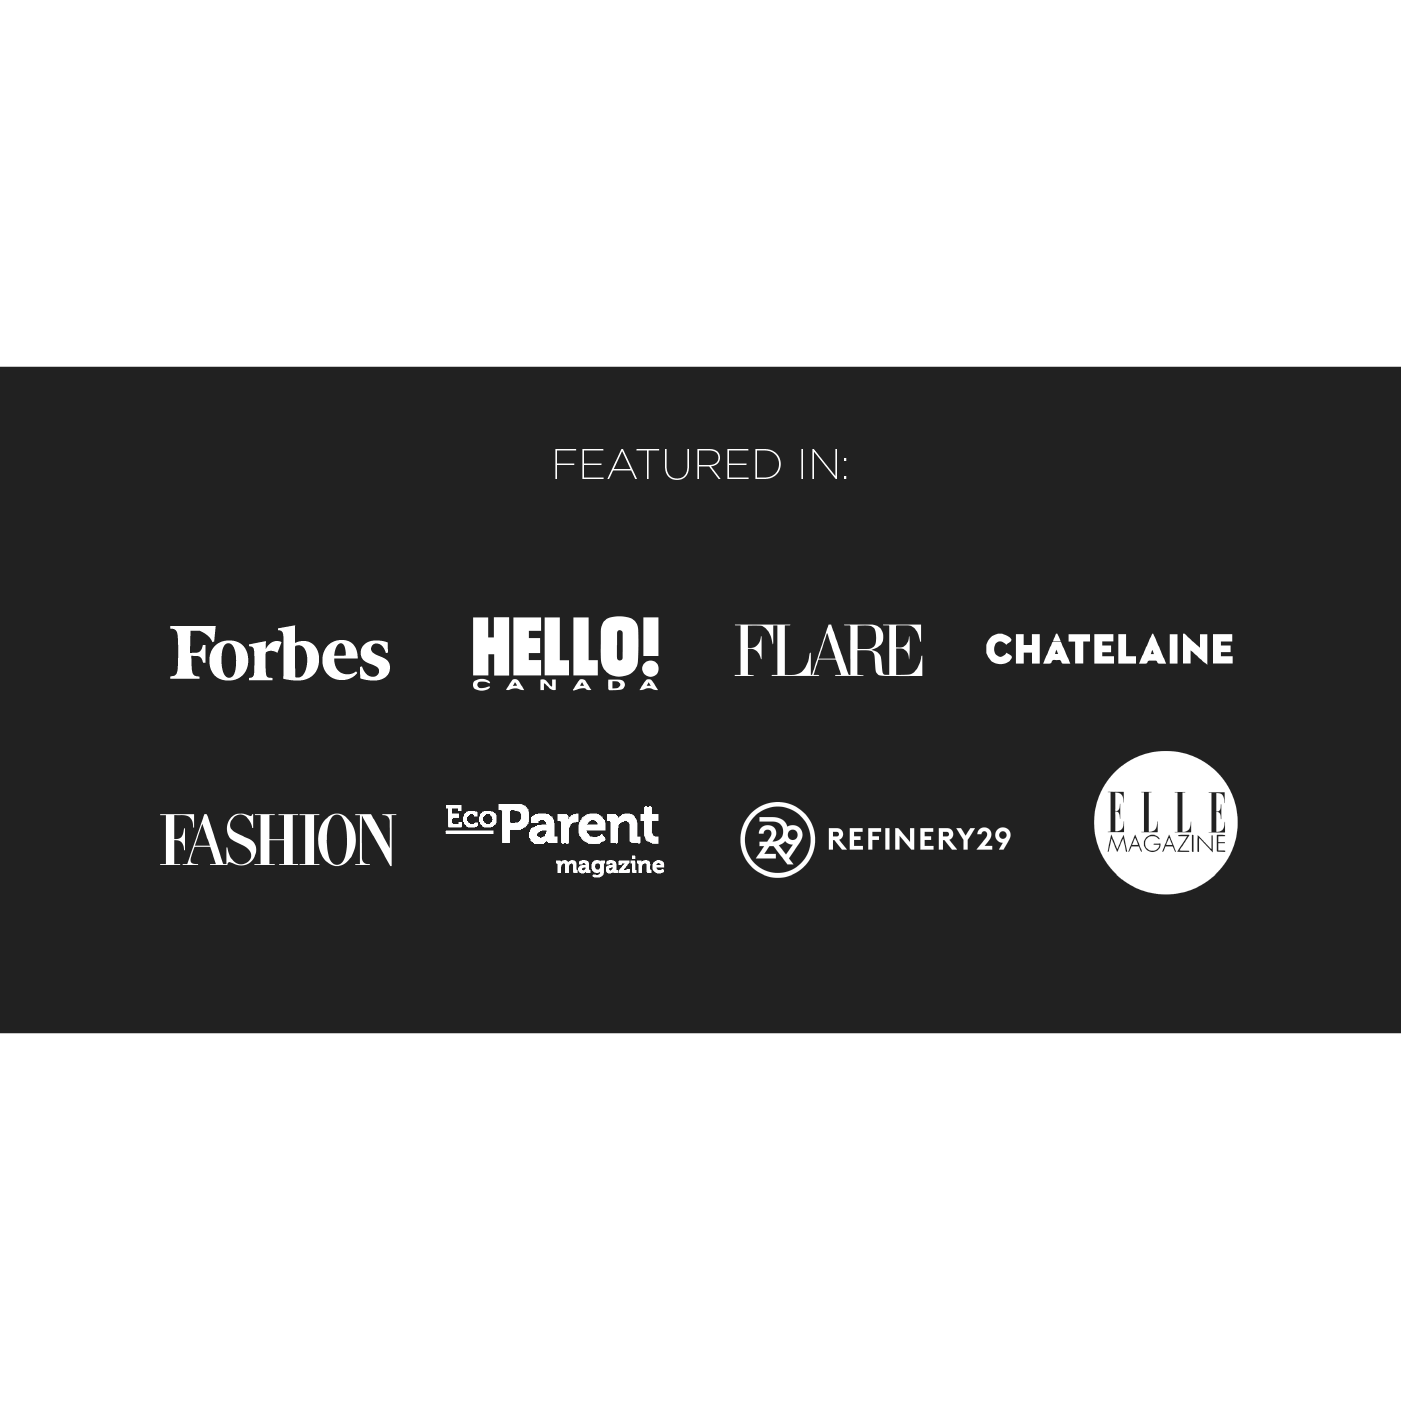 Featured in Forbes, Hello!, Flare, Chatelaine, Fashion, EcoParent magazine, Refinery 29, Elle Magazine